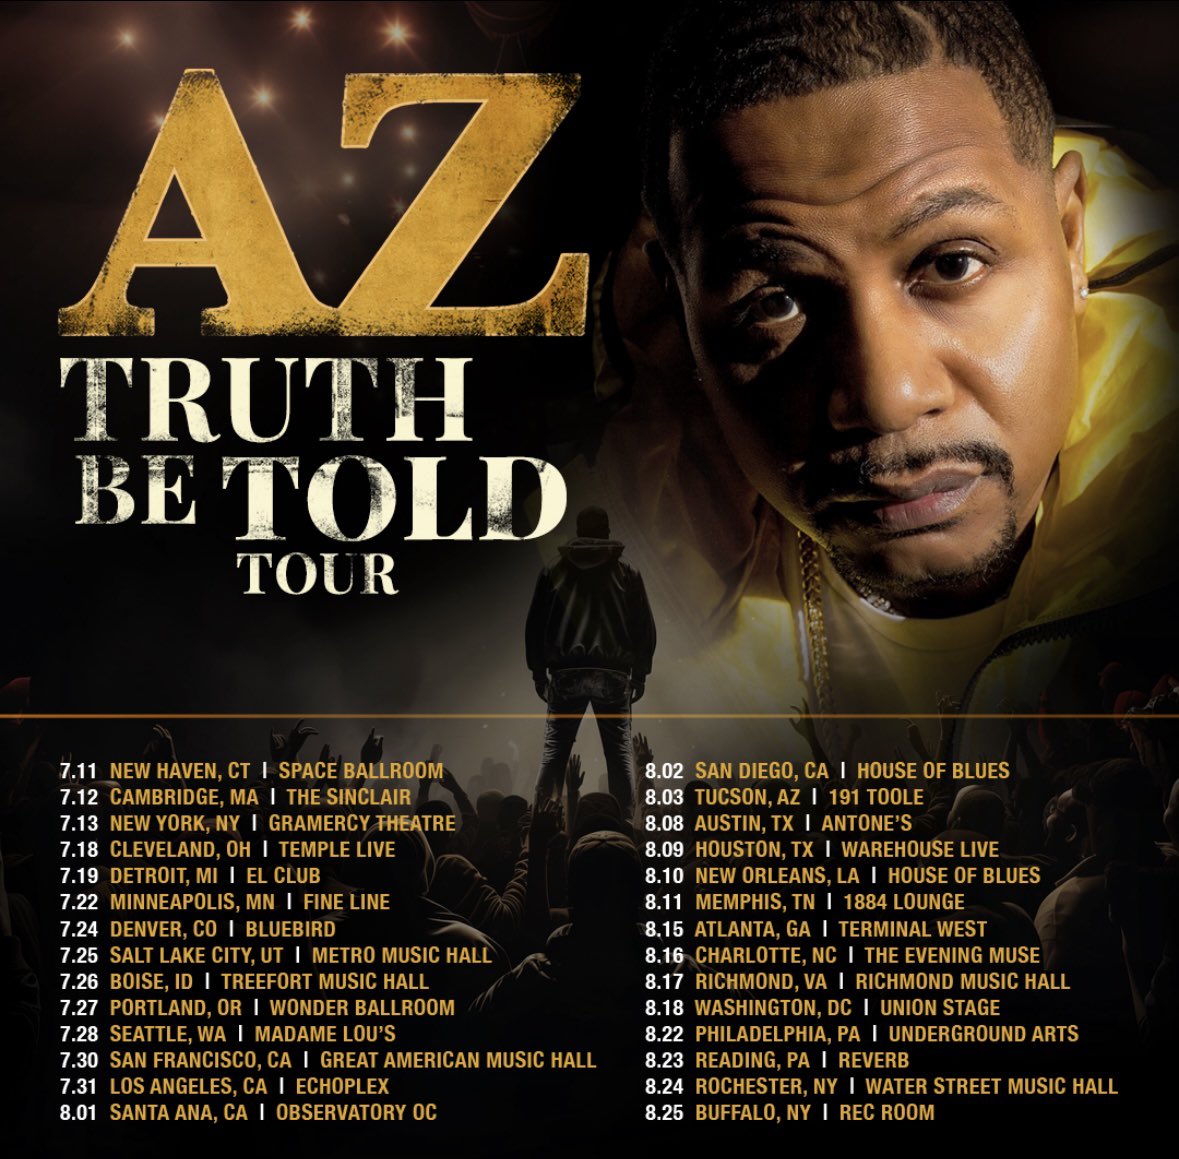 “Truth Be Told” Album Release Tour coming to a city near you. Finally!! Public on-sale 4/18 @ 10am local - www.quietmoneydirect@gmail.com for tickets and also check with venue.. who’s coming out?!?